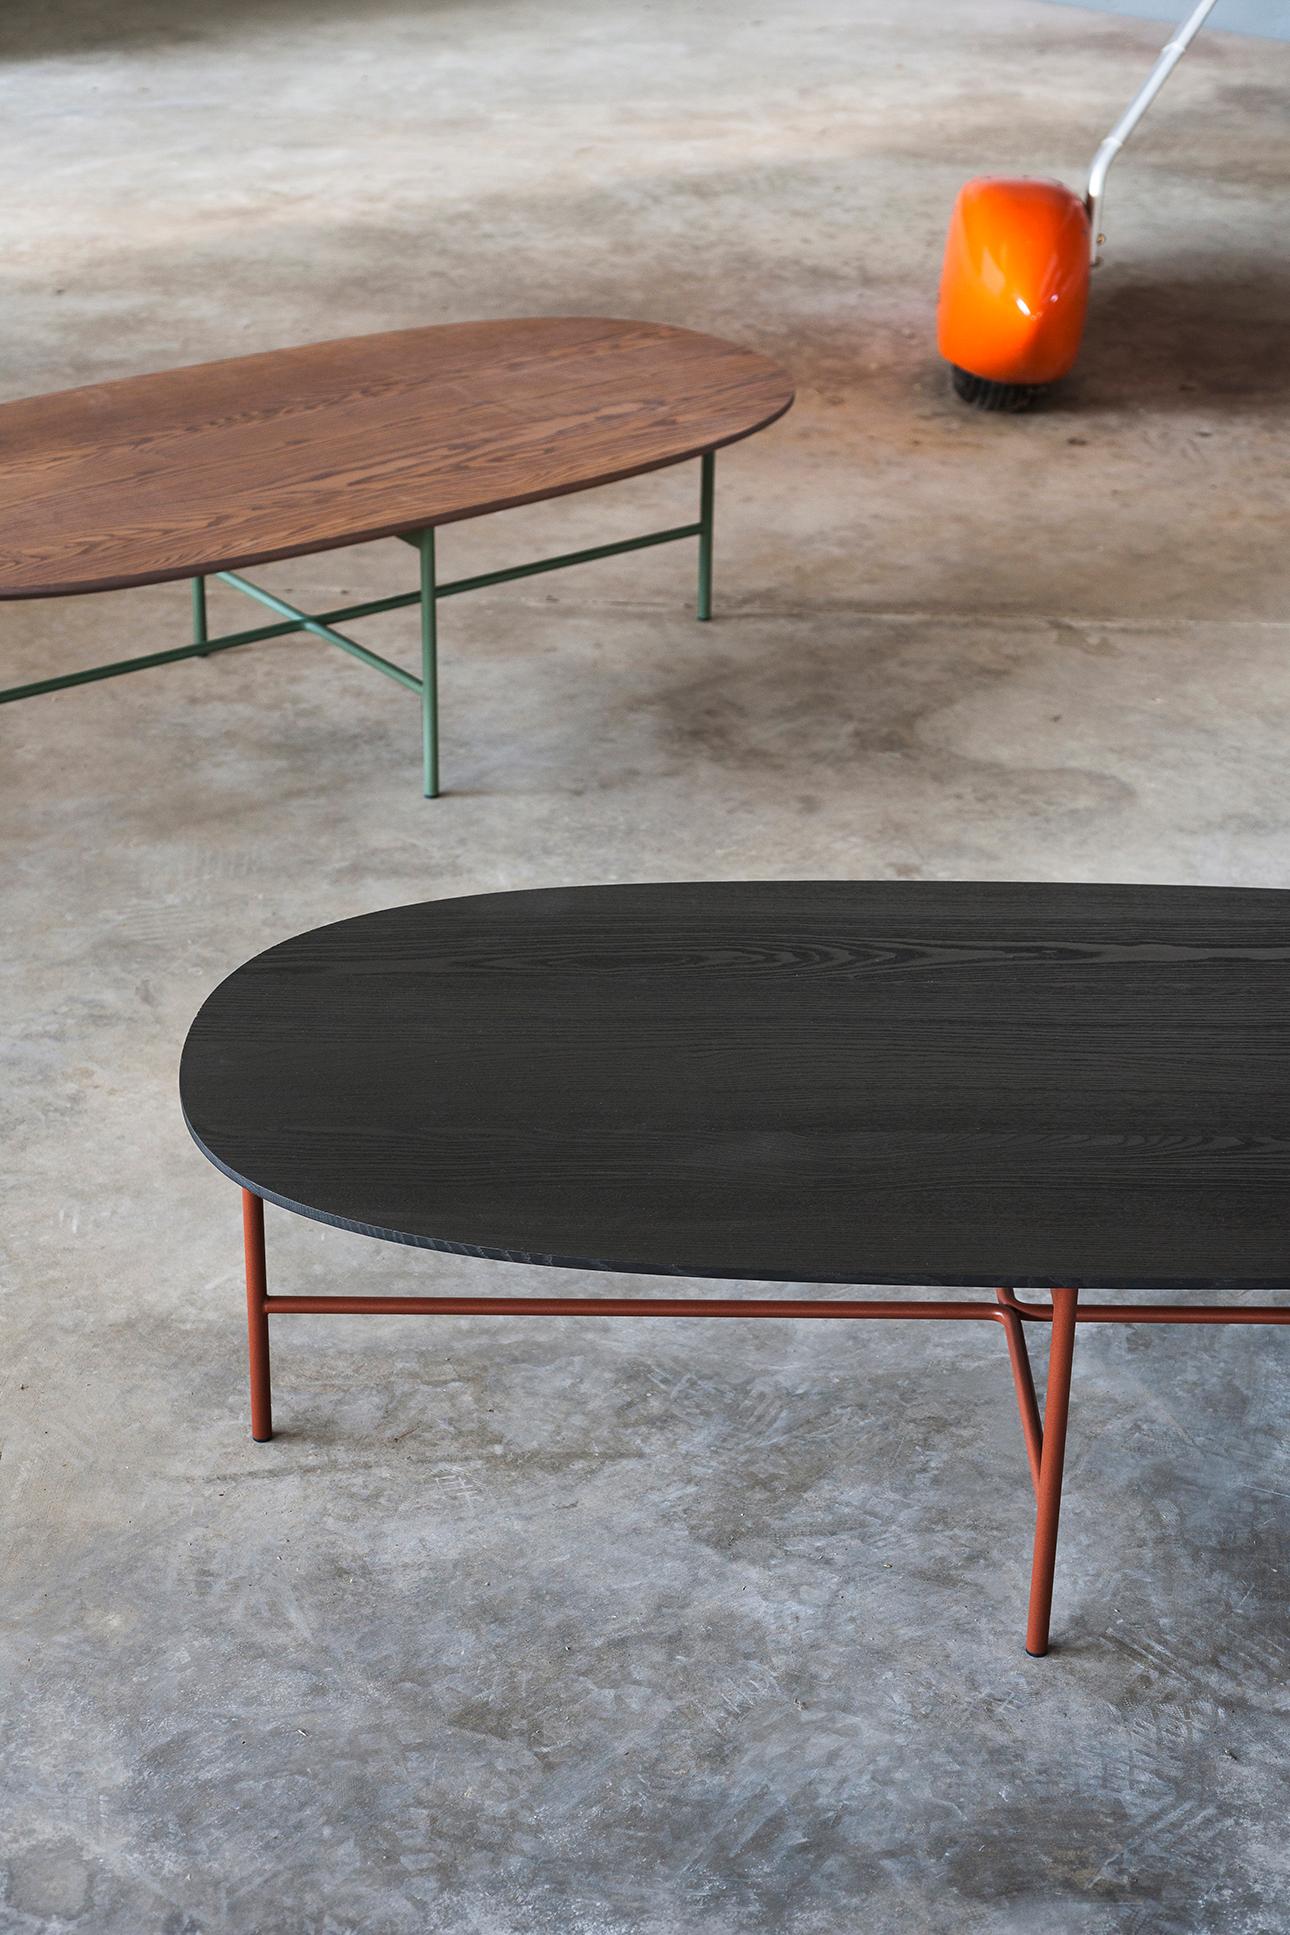 Italian Tacchini Soap Table 130cm in Wood Top with Rust Metal Base by Gordon Guillaumier